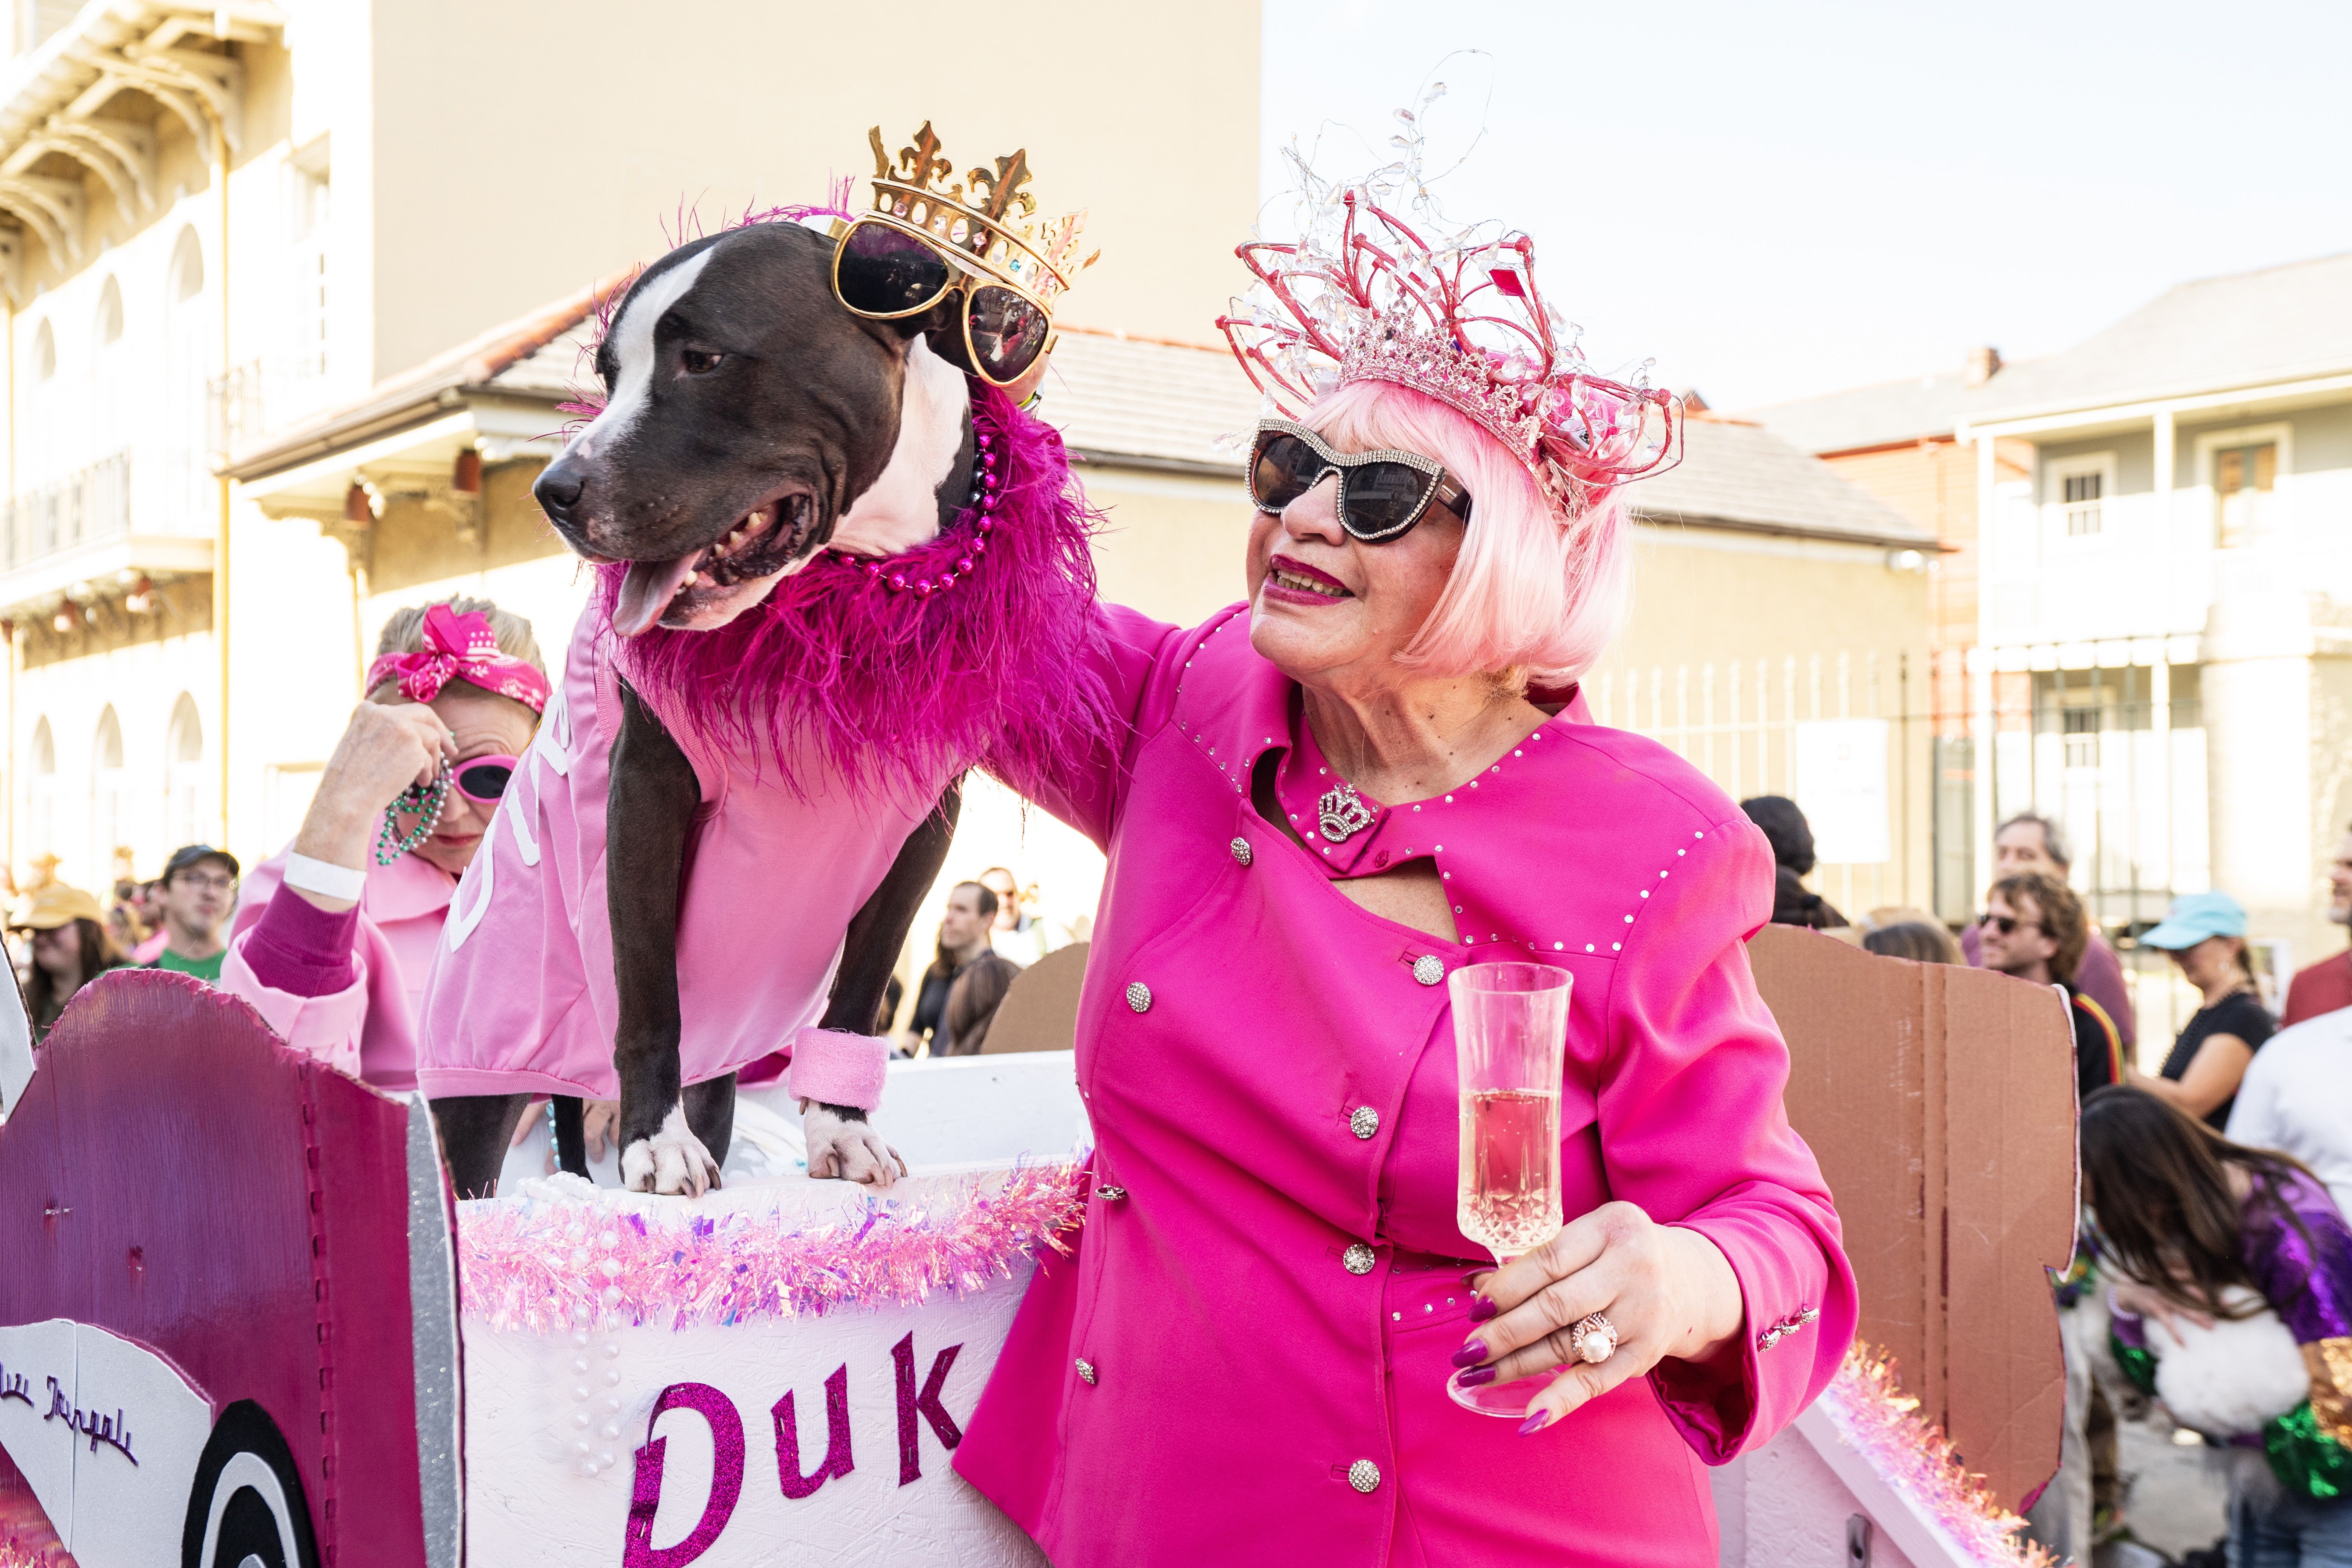 A woman holds a glass of champagne and pets her dog. Both wear crowns.